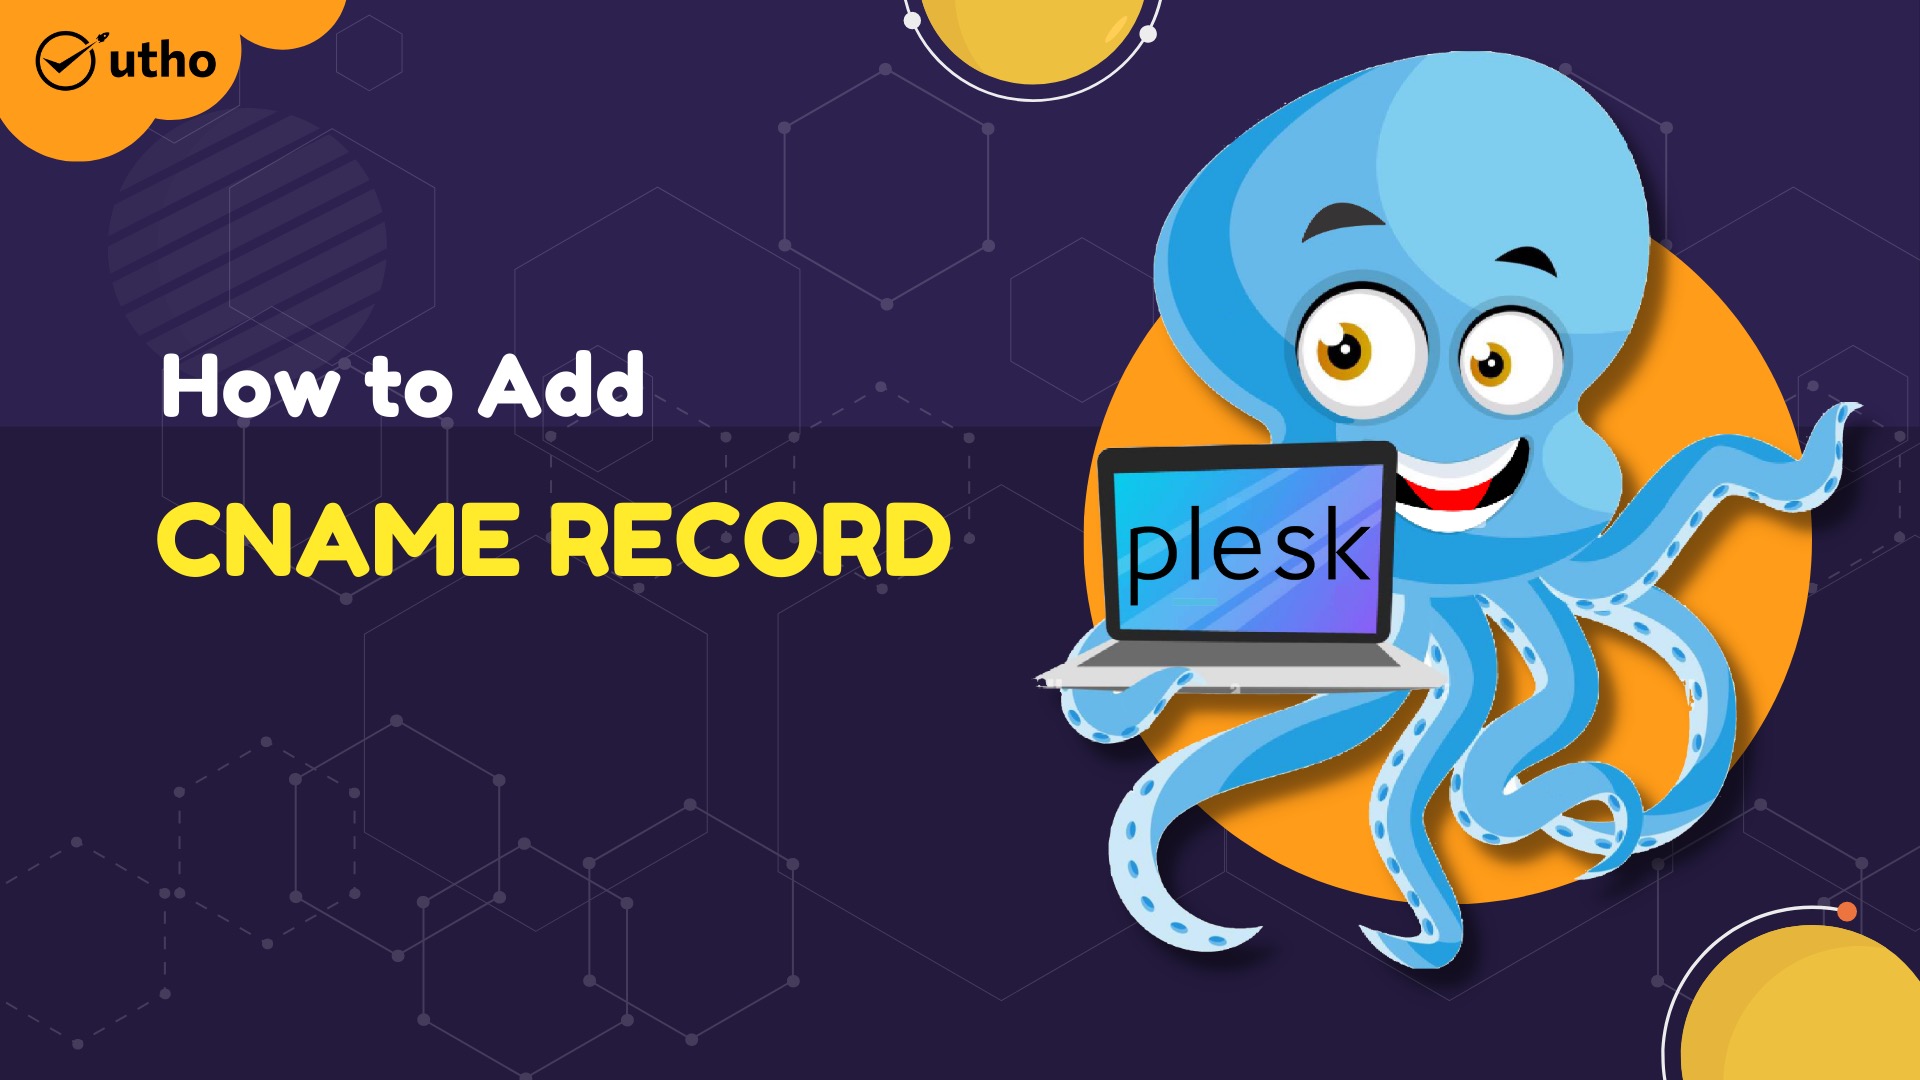 How to add CNAME record in Plesk